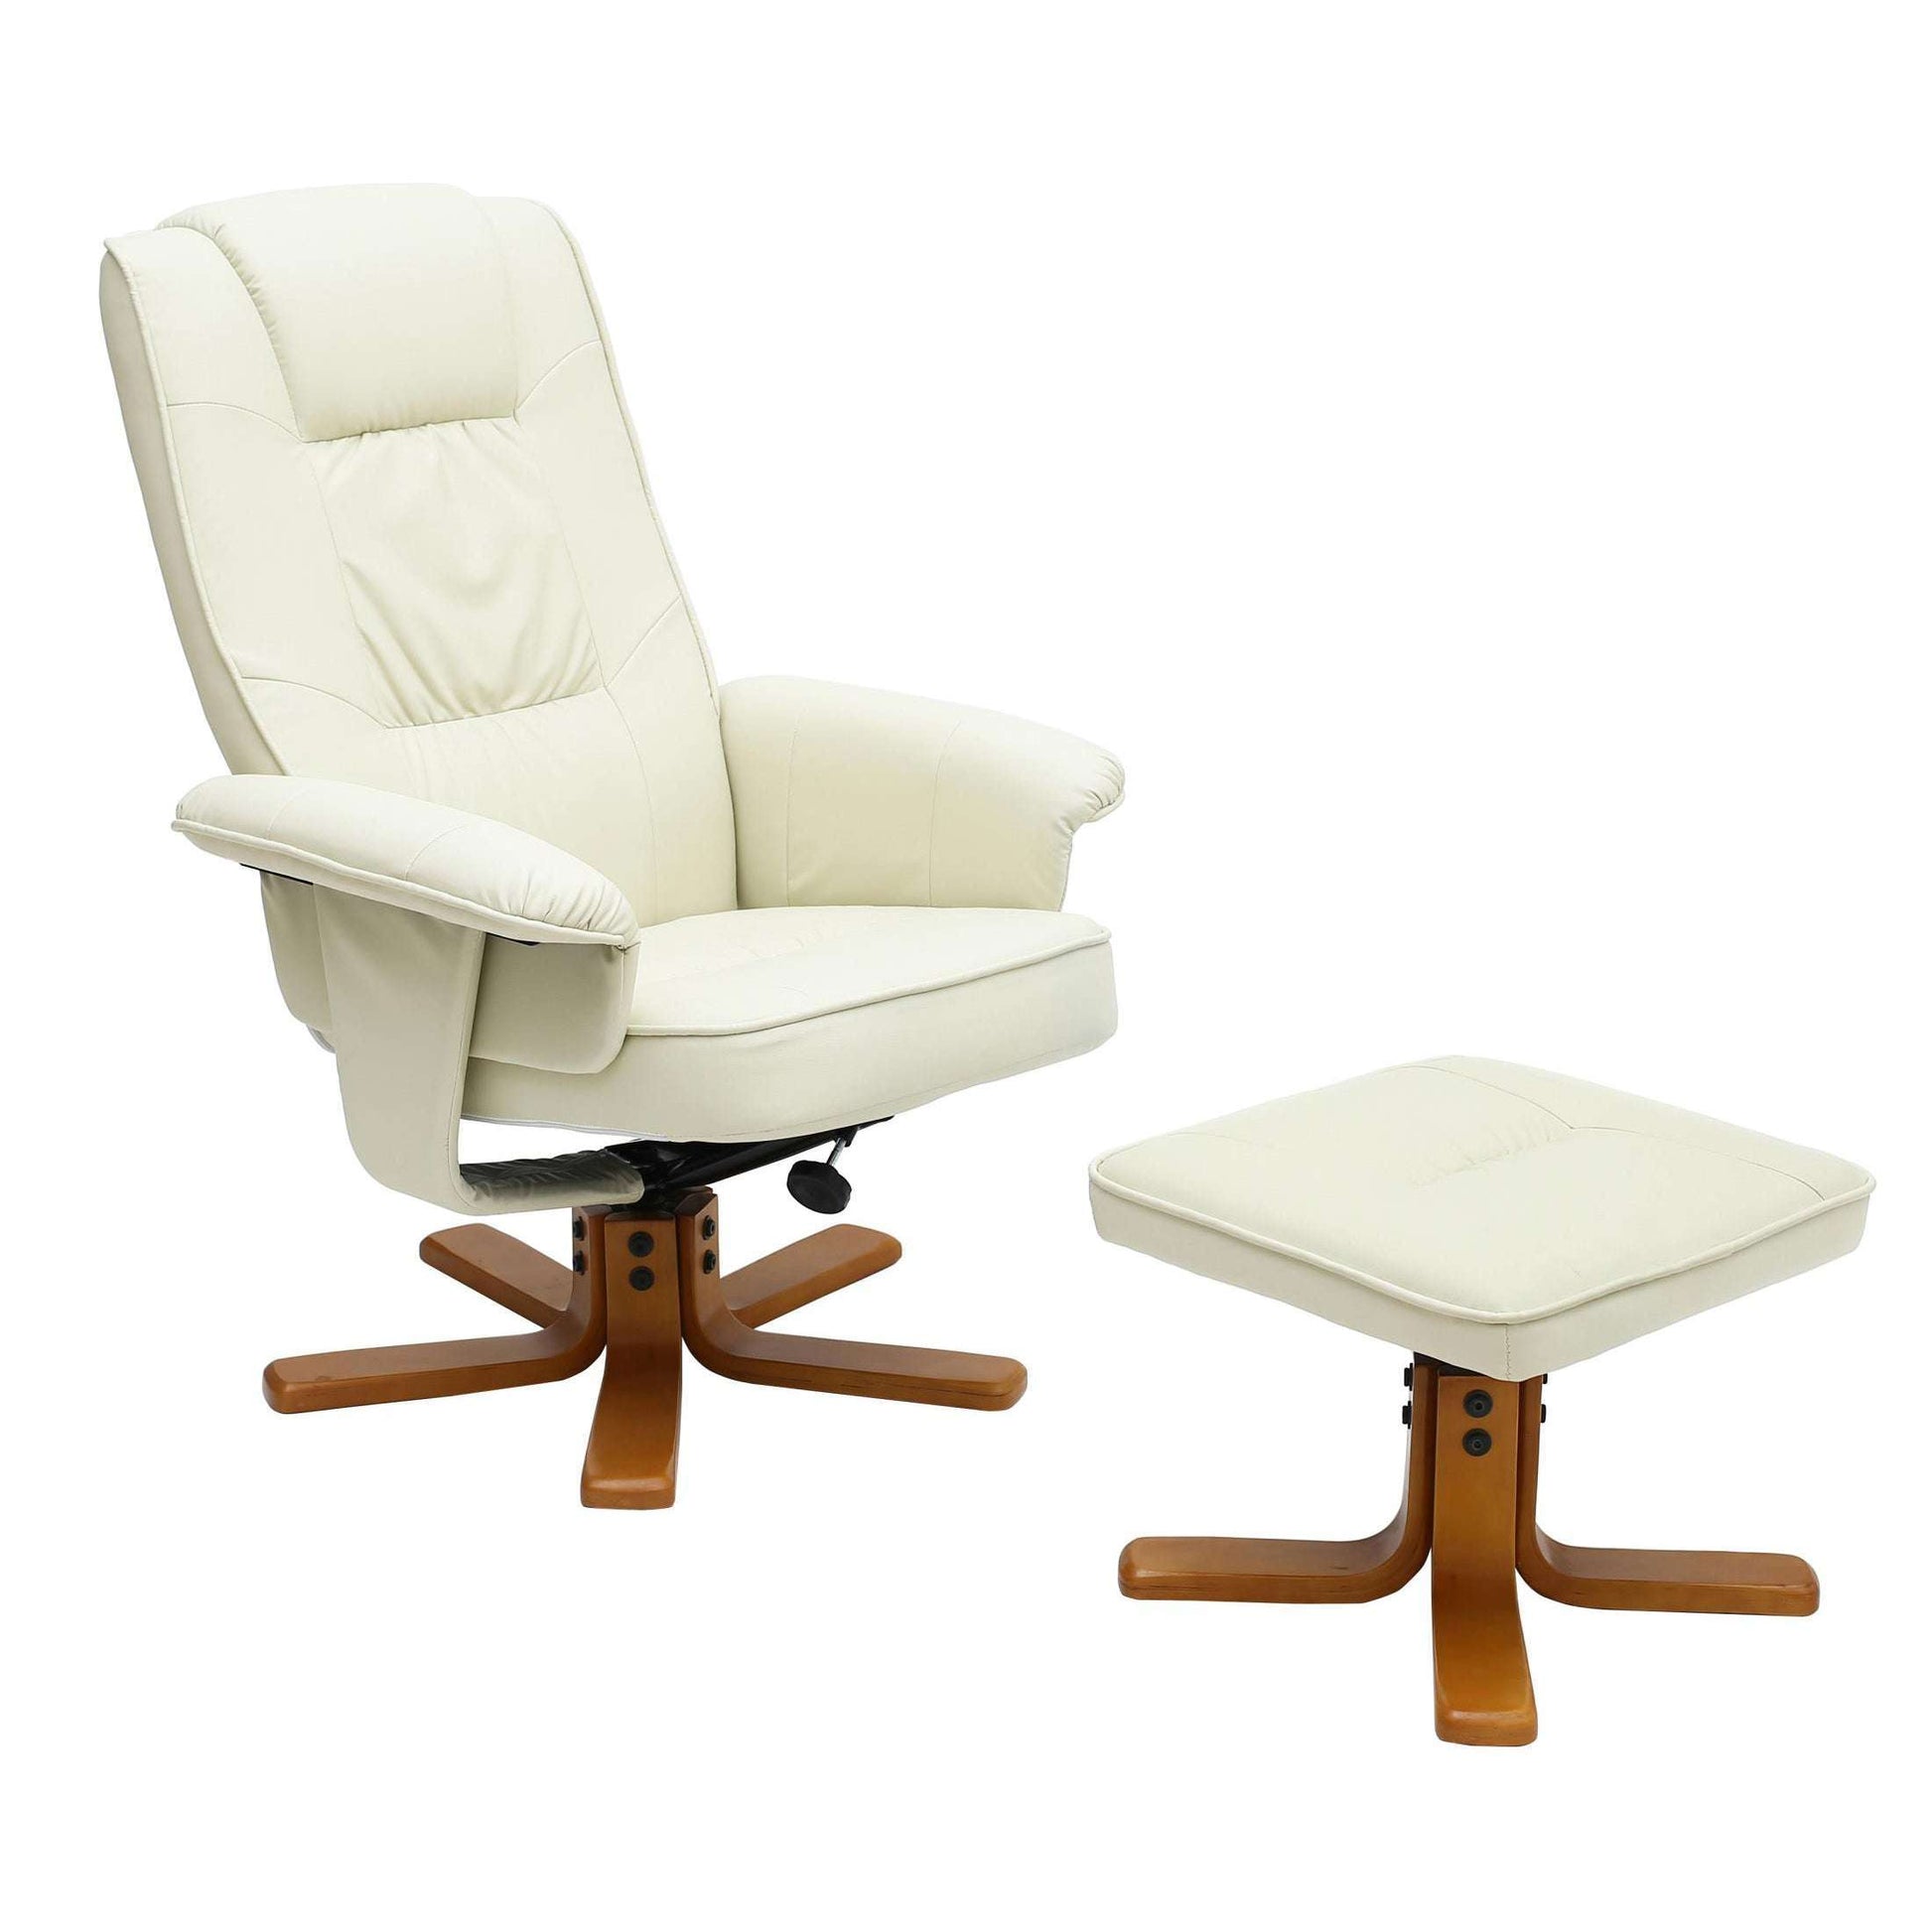 Ashpinoke:Althorpe Recliner with Footstool Polyurethane Cream,Chairs,Heartlands Furniture